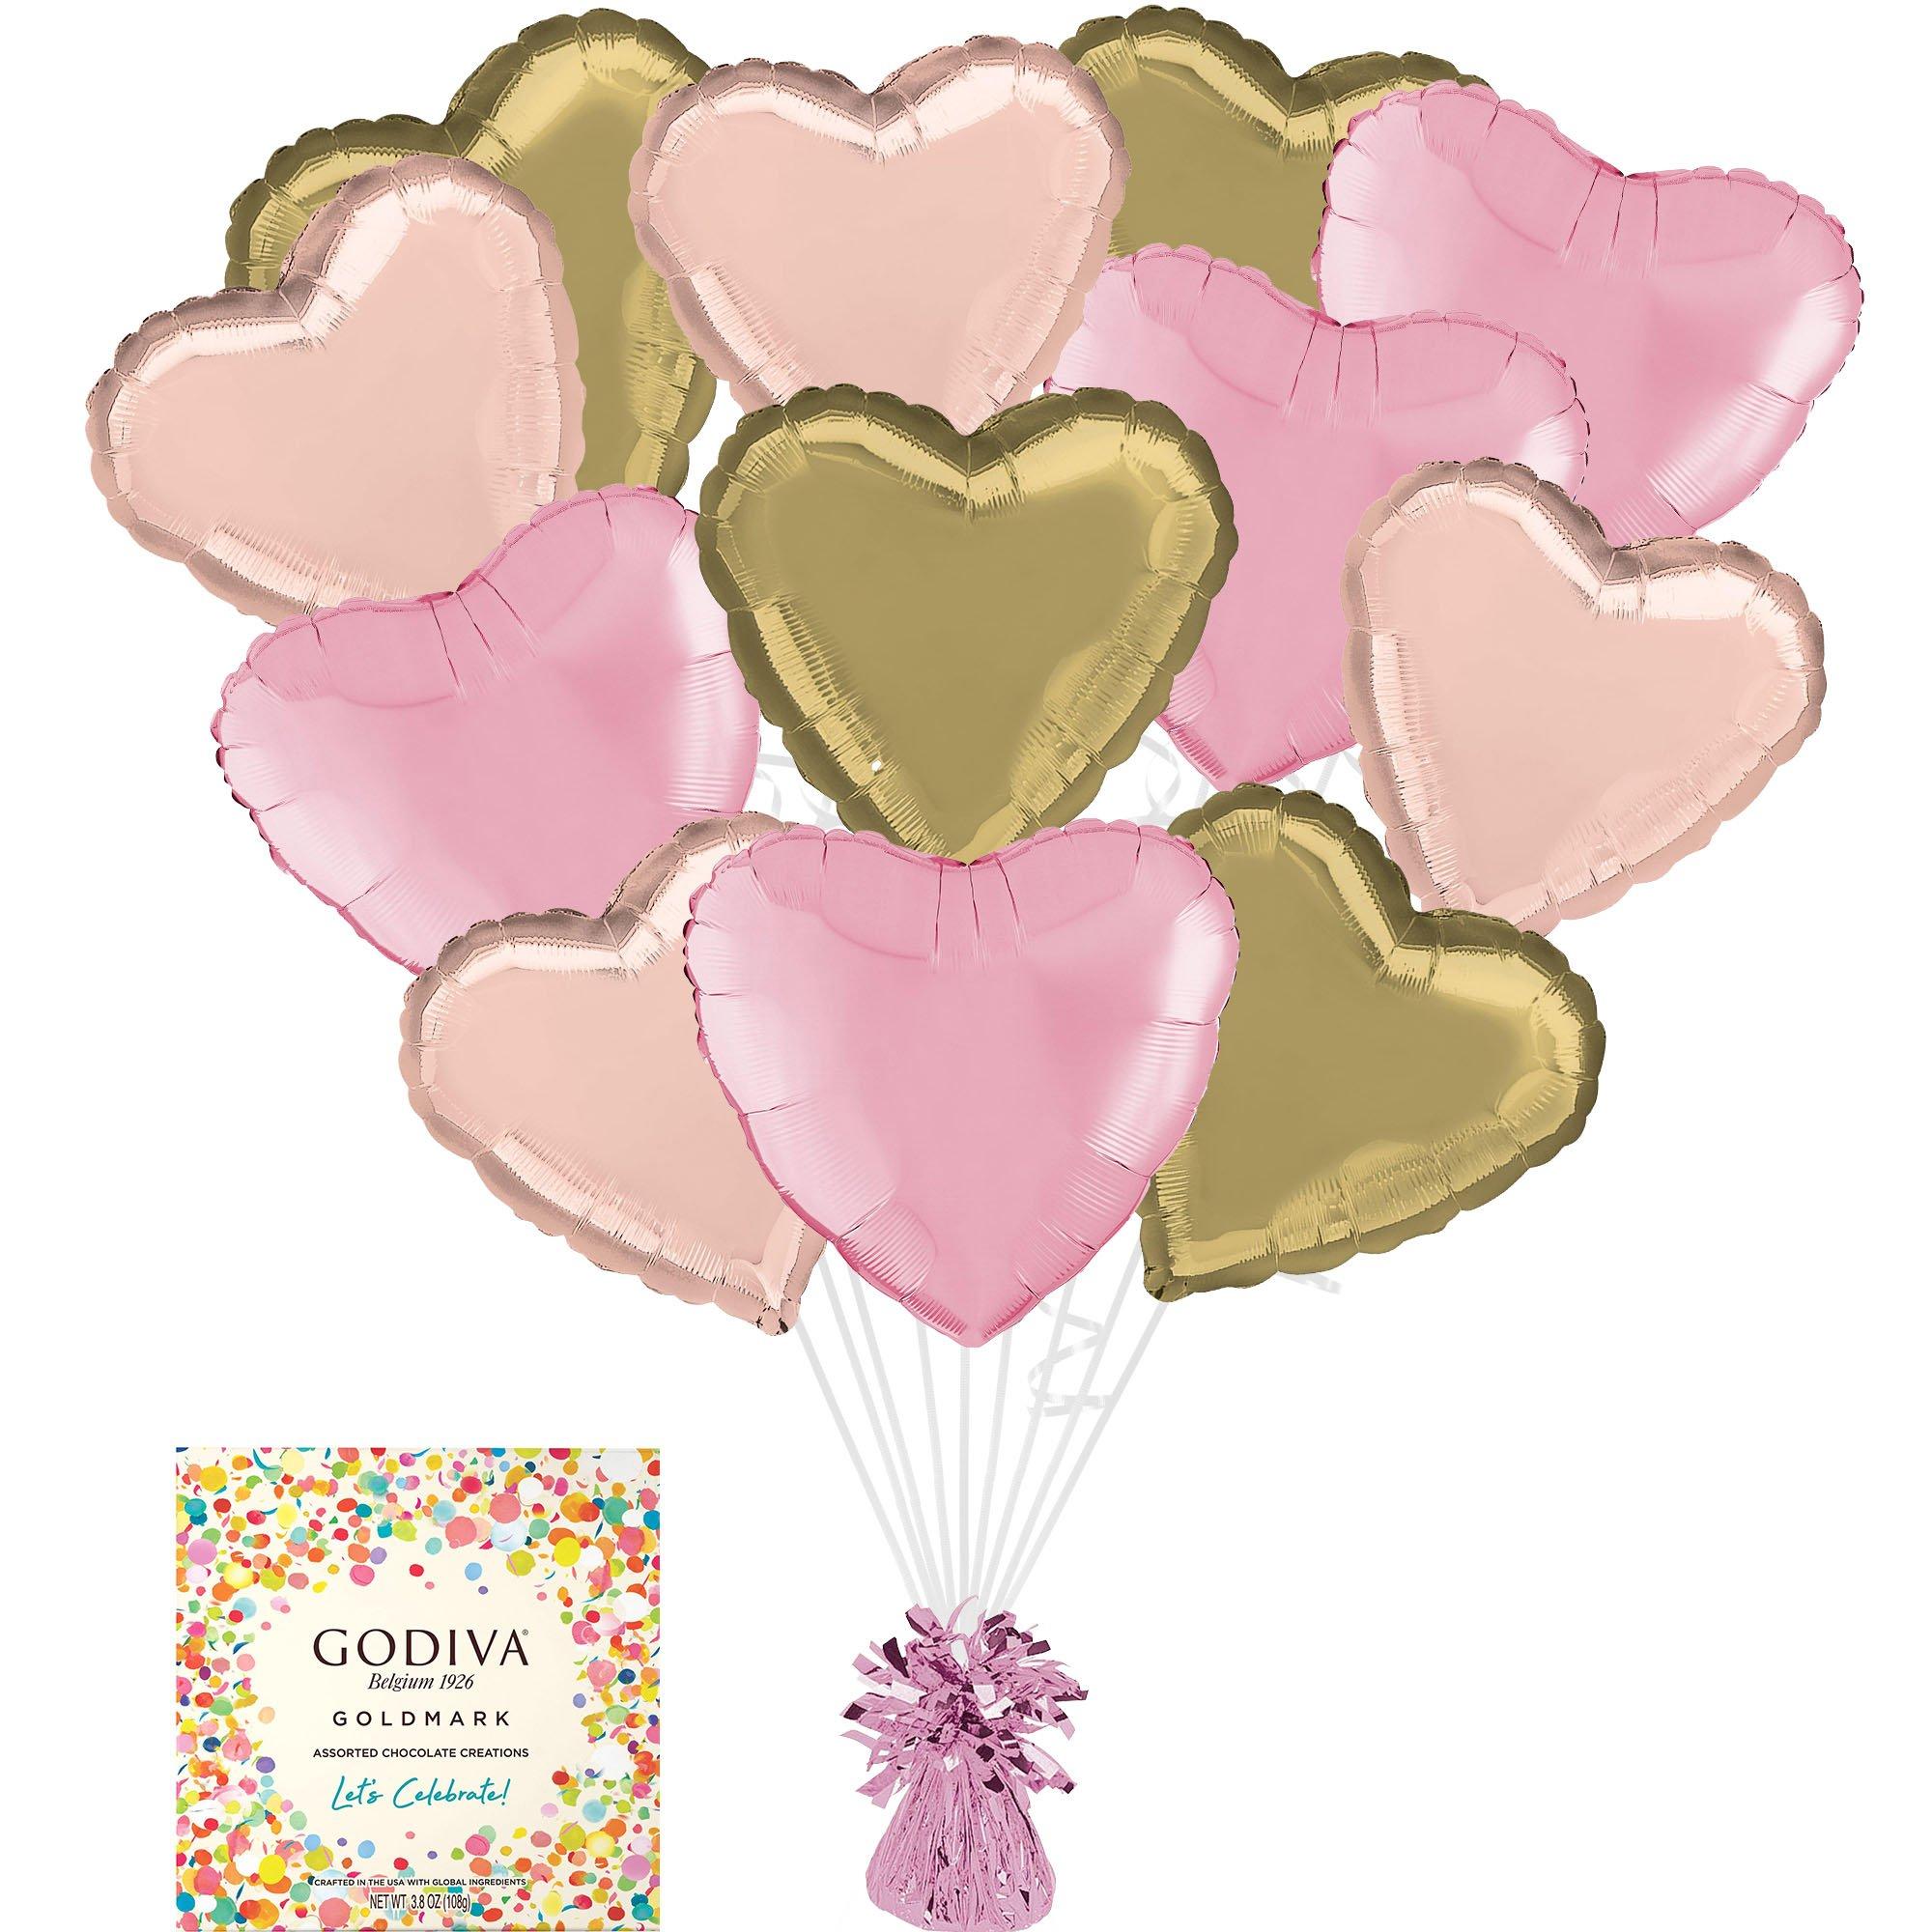 Pink, Gold & Rose Gold Heart Foil Balloon Bouquet with Balloon Weight & Godiva Chocolates - Gift Set